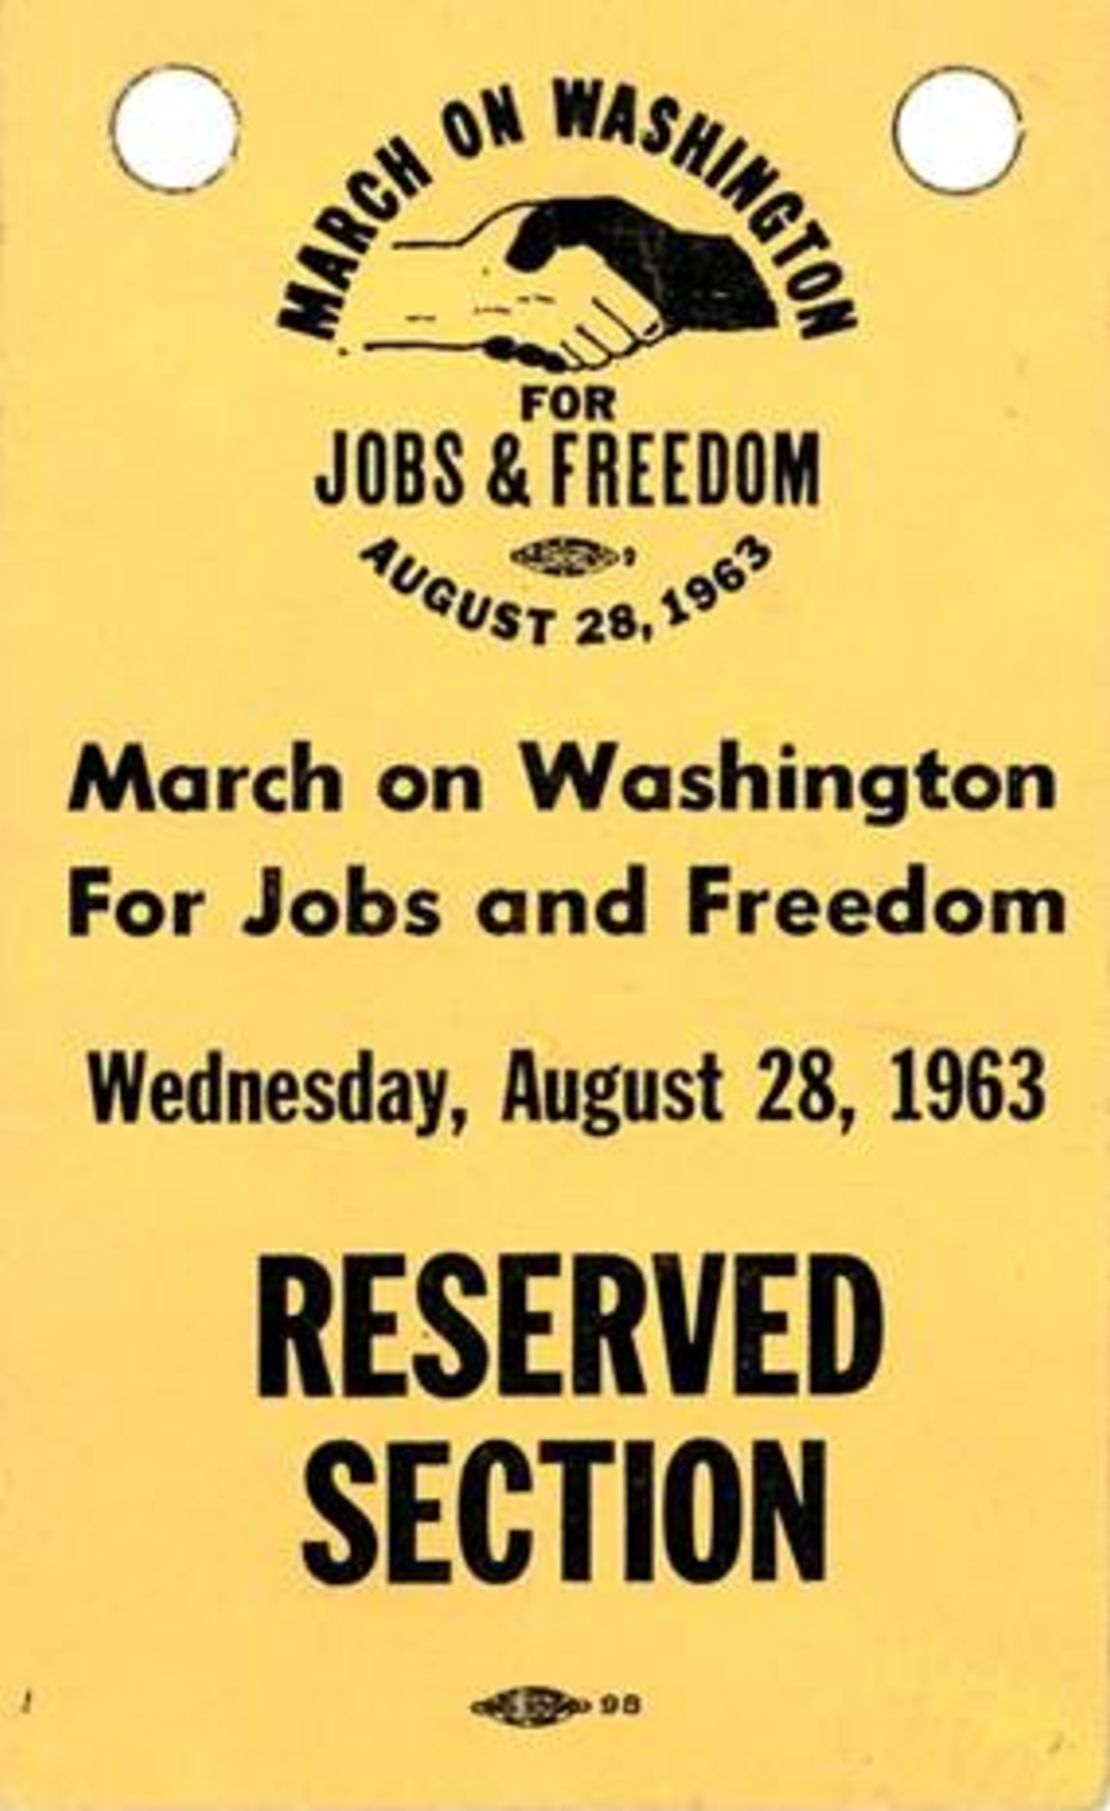 Tickets to the March on Washington's reserved section.